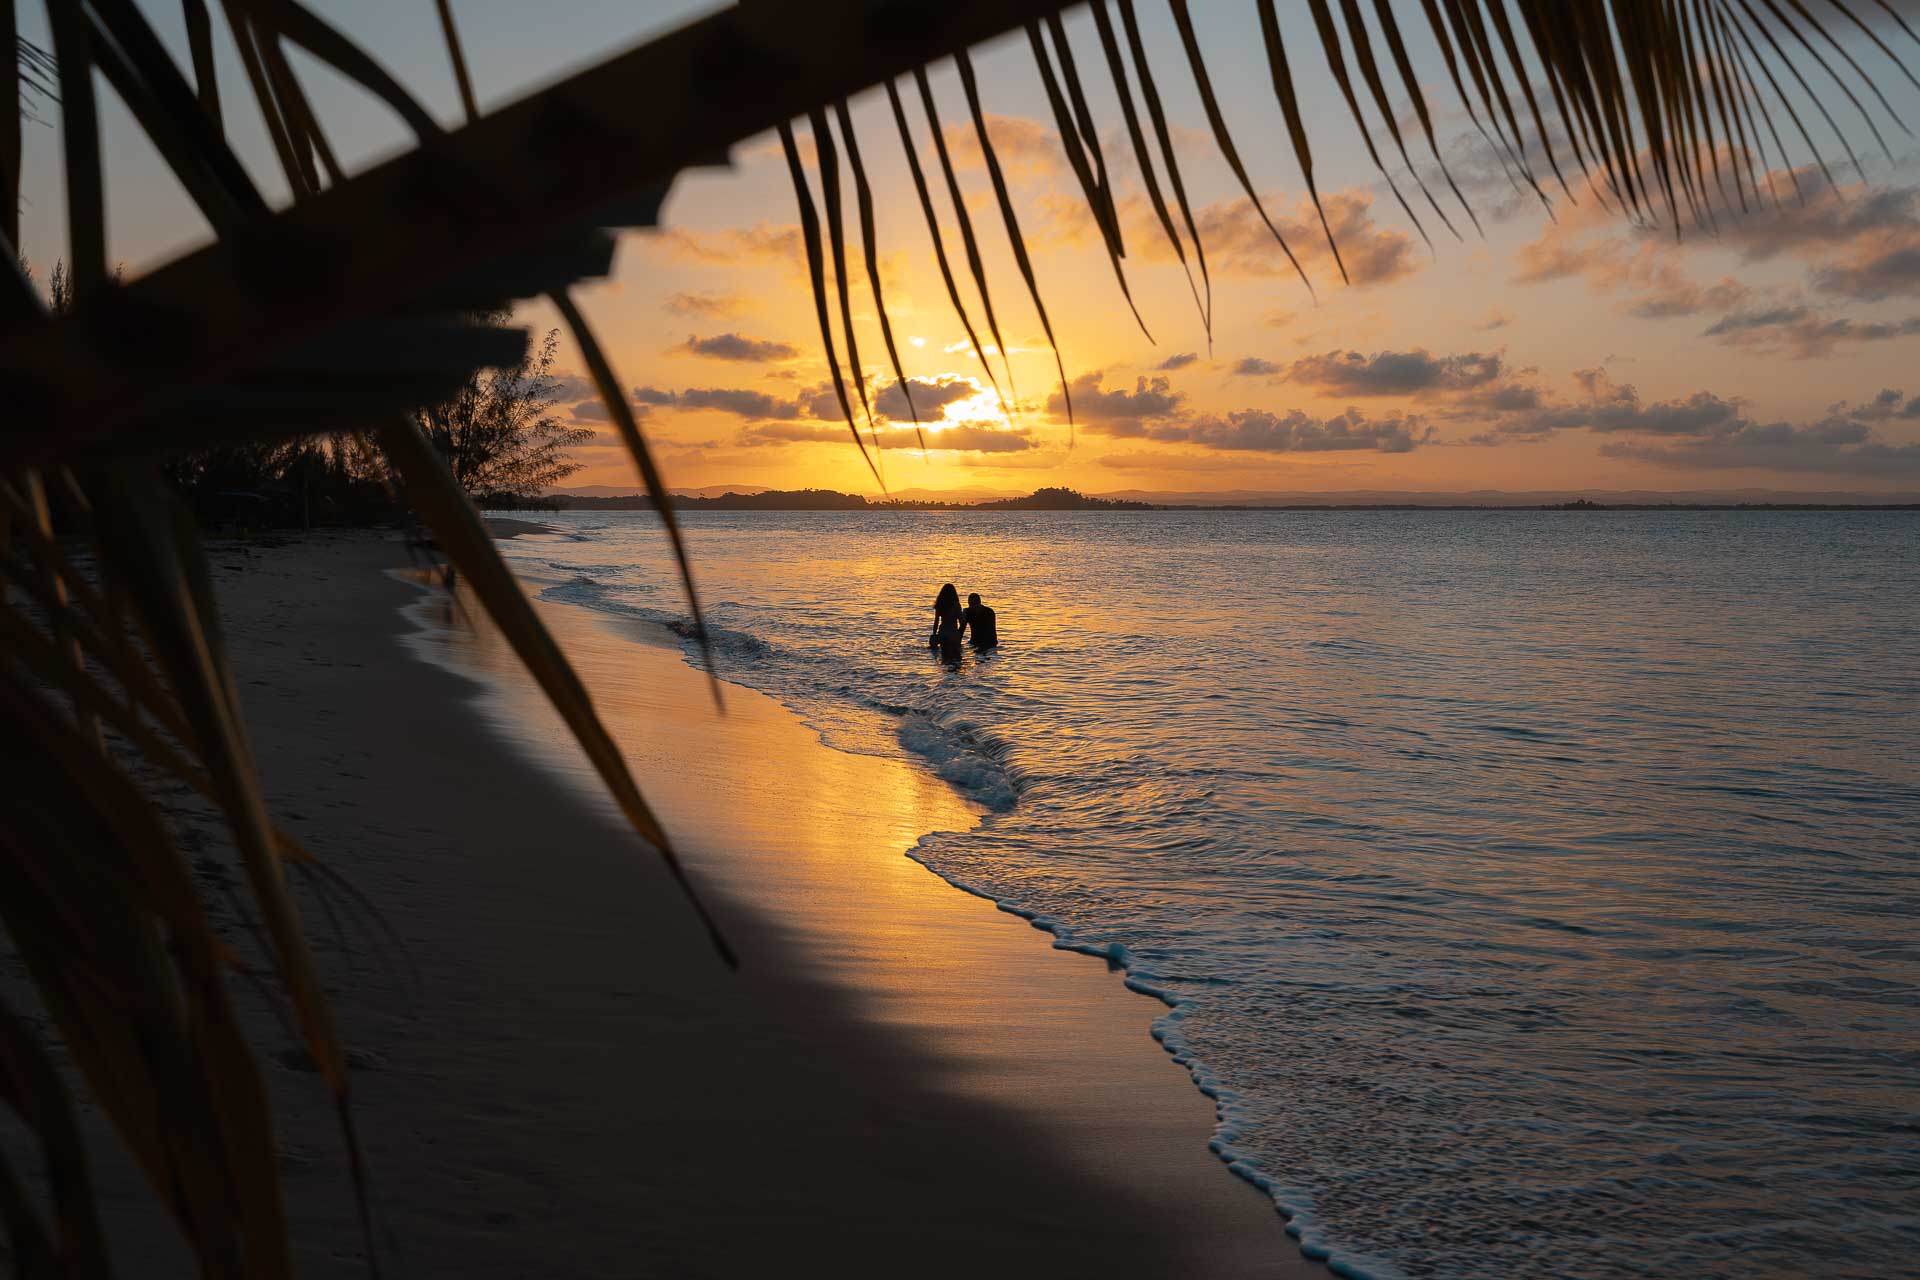 The sun setting in the horizon with a couple in the water and a coconut tree leave framing the photo